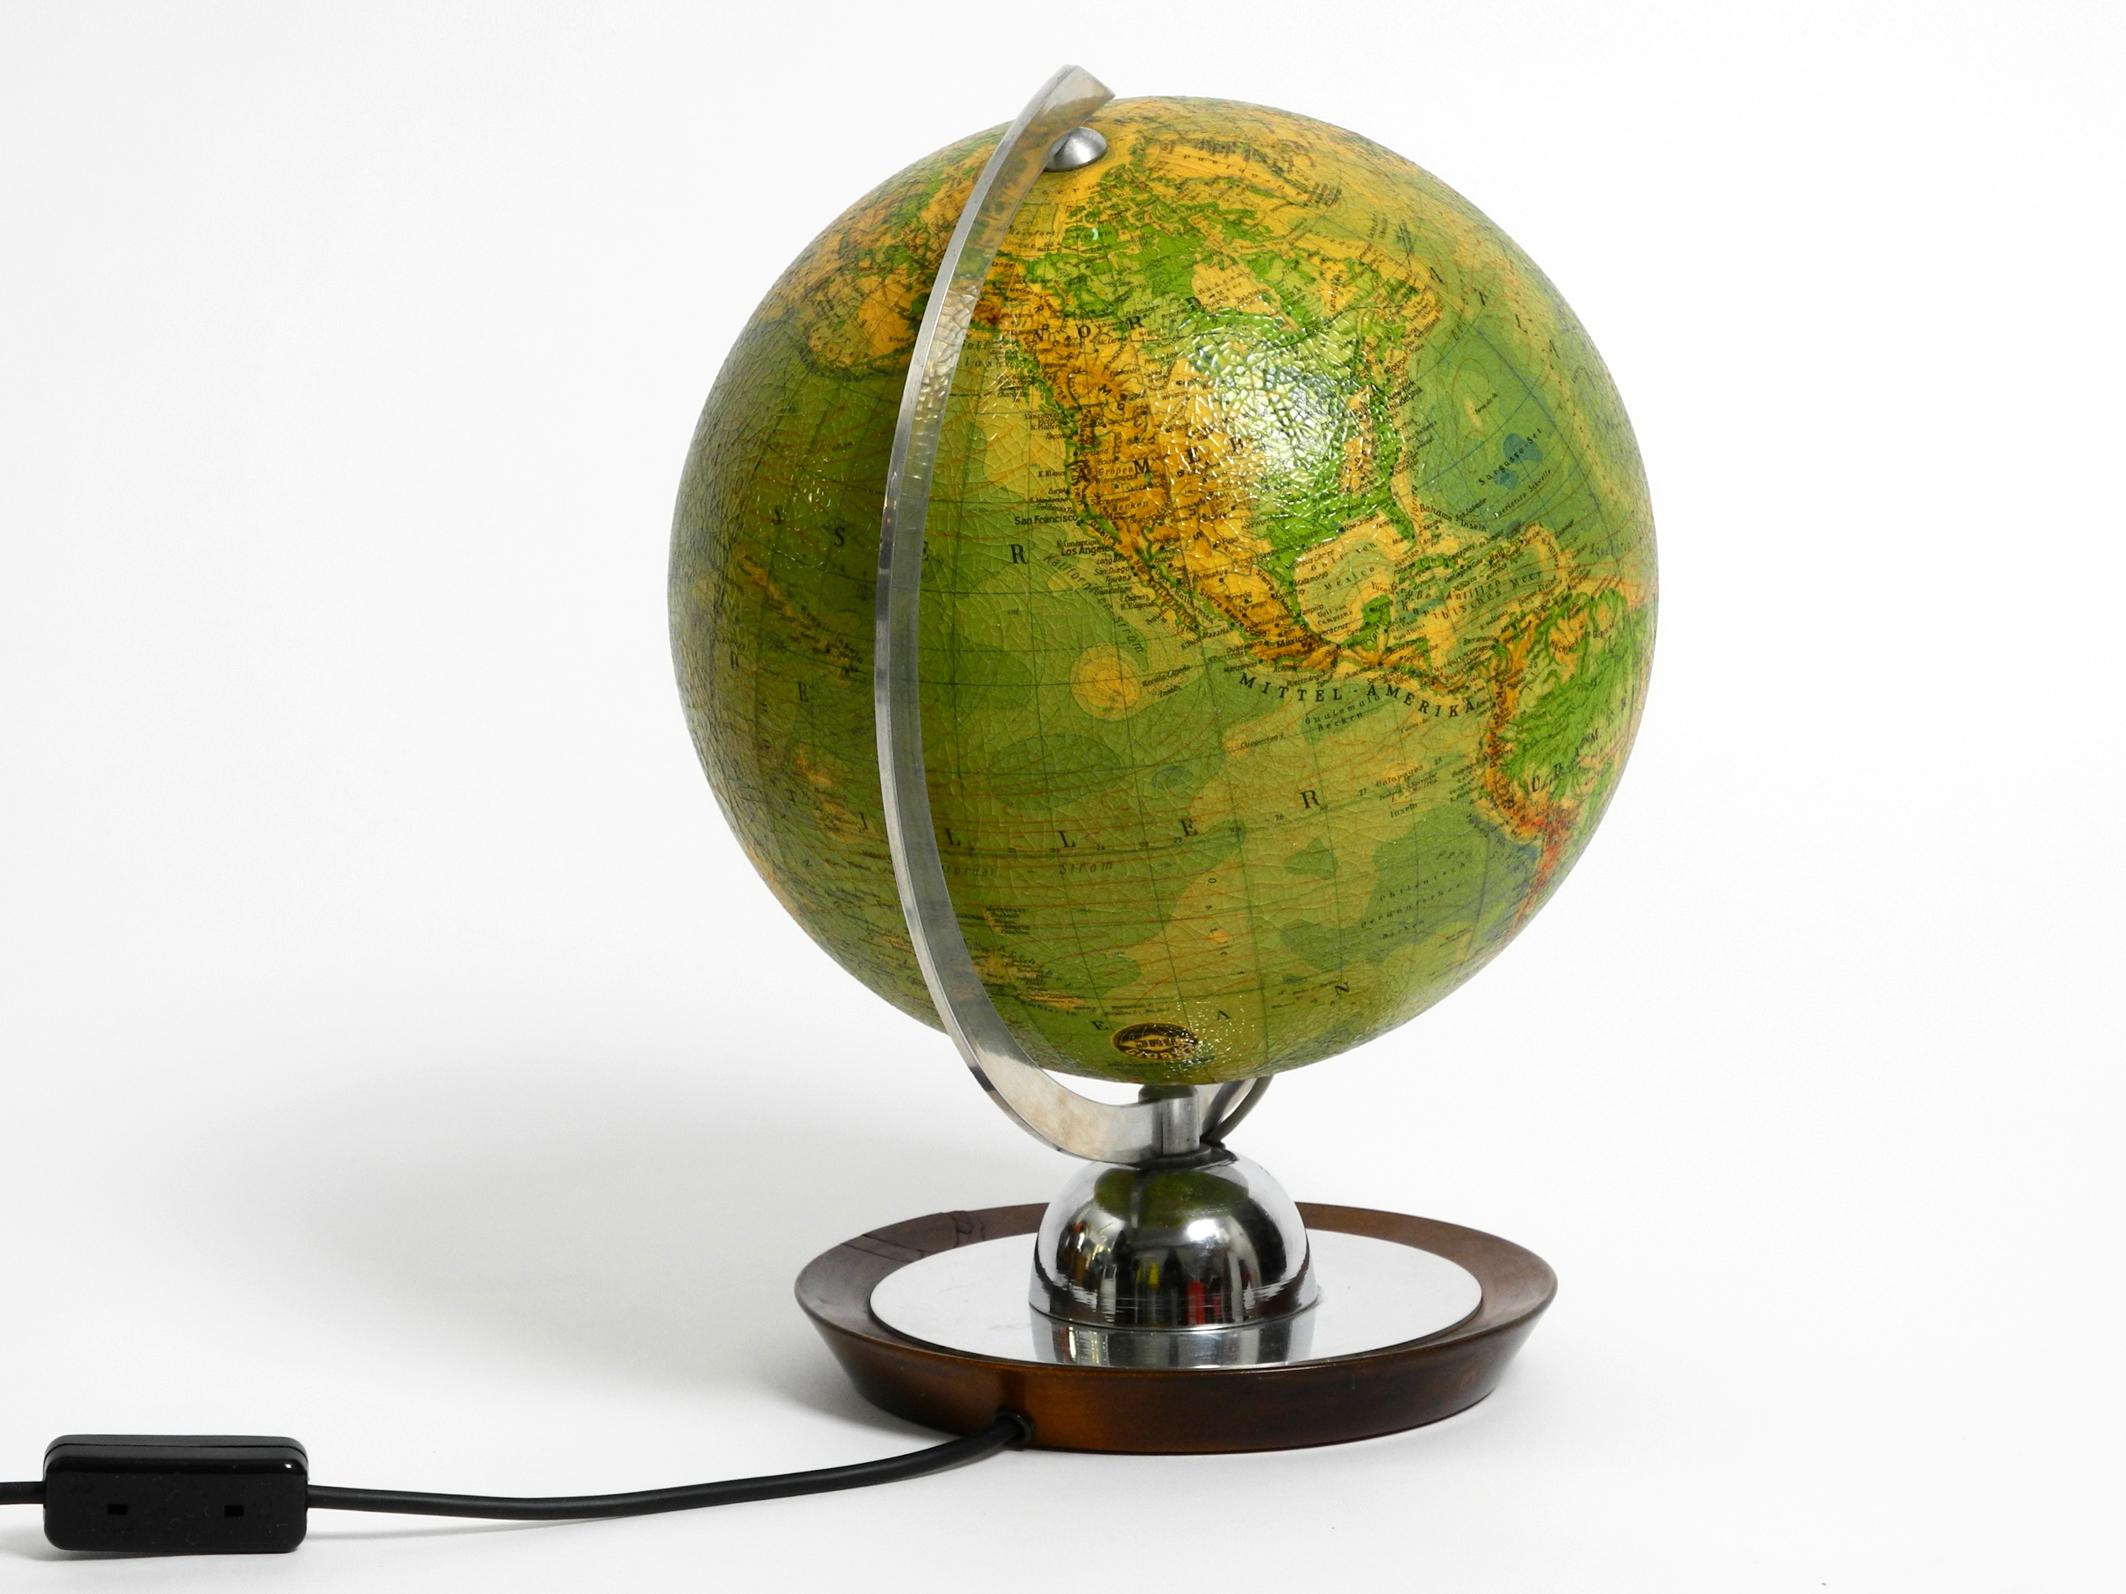 Beautiful Midcentury illuminated glass globe from the 1960s by JRO Globus.
Manufacturer is JRO-Verlag Munich. Made in Germany.
Solid wood and polished aluminum base. Arc is also made of aluminium.
The globe is in good condition. 
Scale 1:50 000